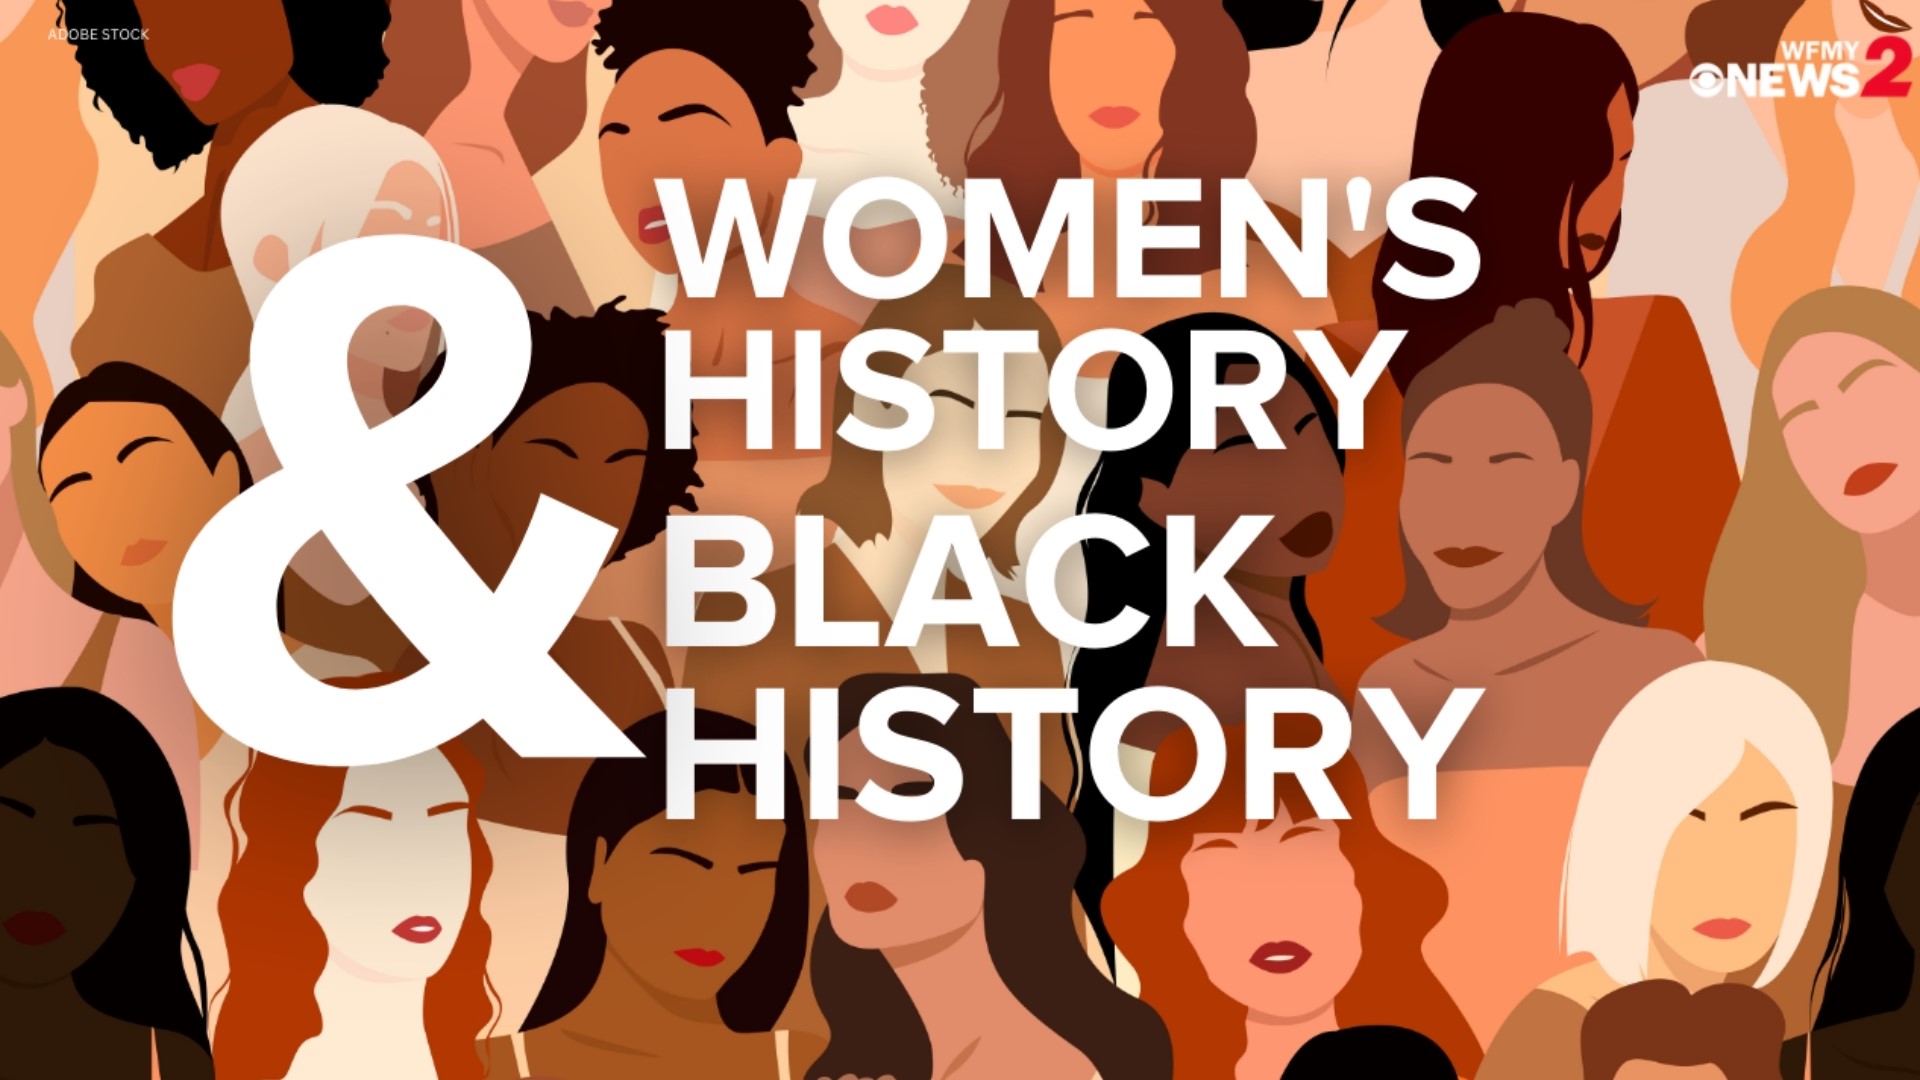 2 Wants to Know looks into all the great contributions and celebrations from around the world during Women’s History Month and Black History Month.